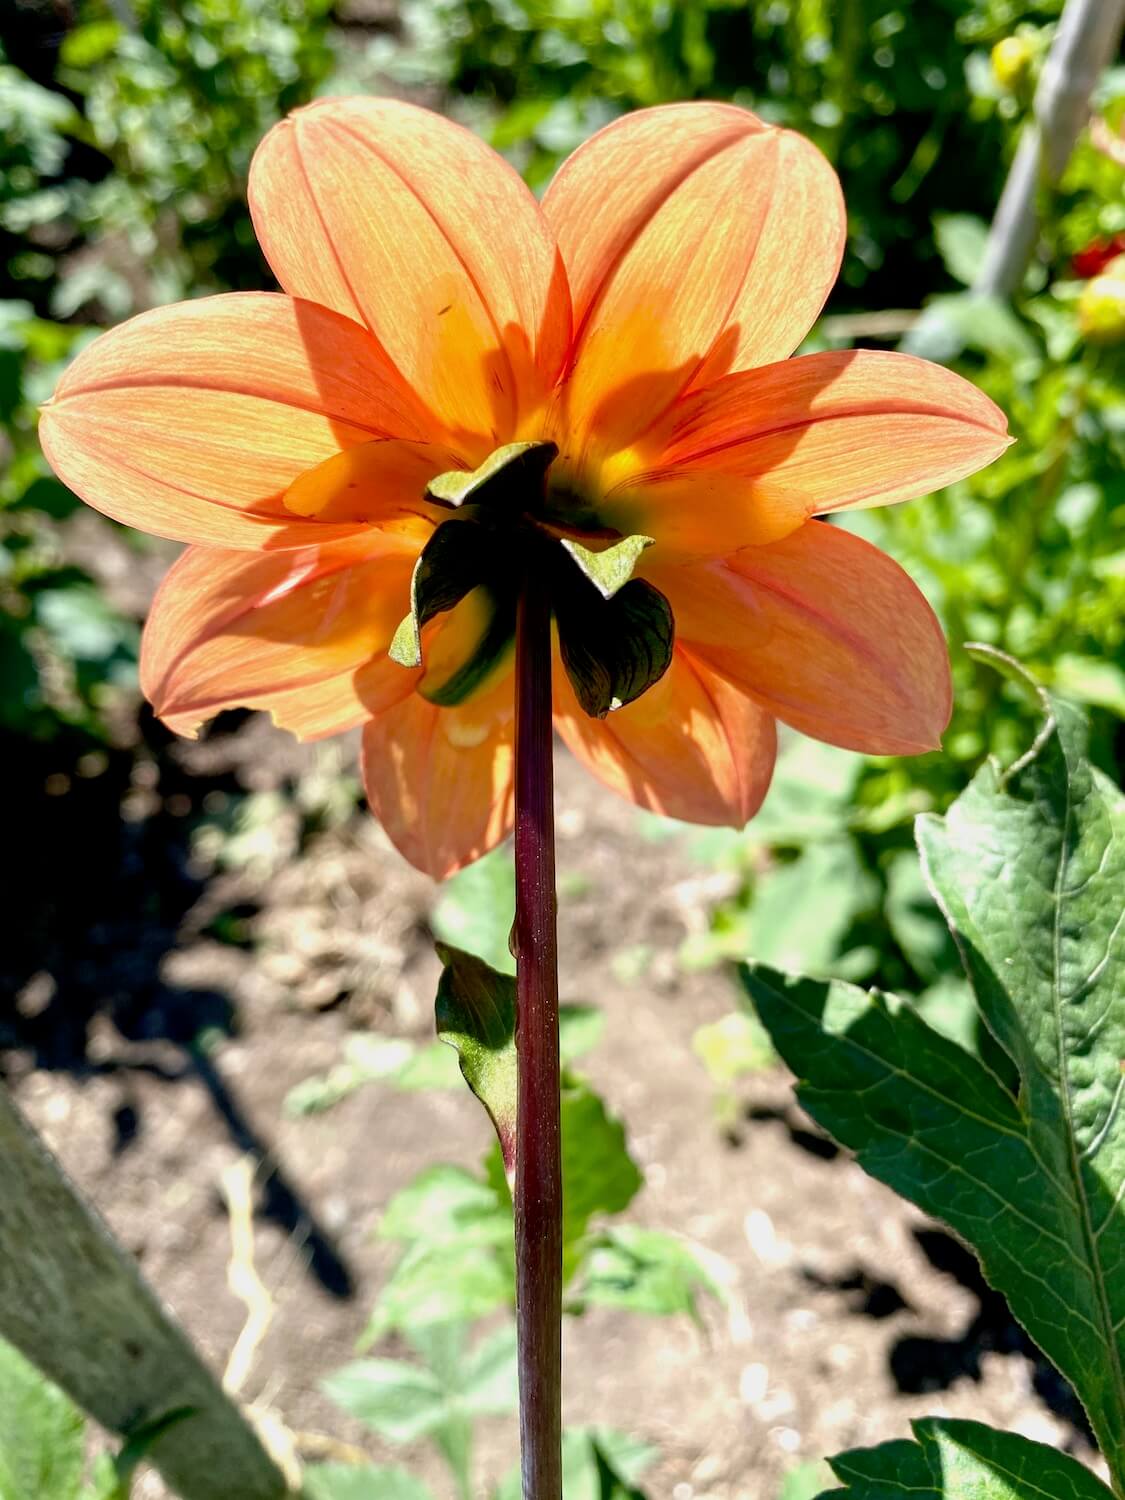 The back of an orange flower shows the ever thin petals that allow the sun to shine through. The stem is a reddish color and in the background is out of focus green leaves and brown dirt on the ground of the flower garden.